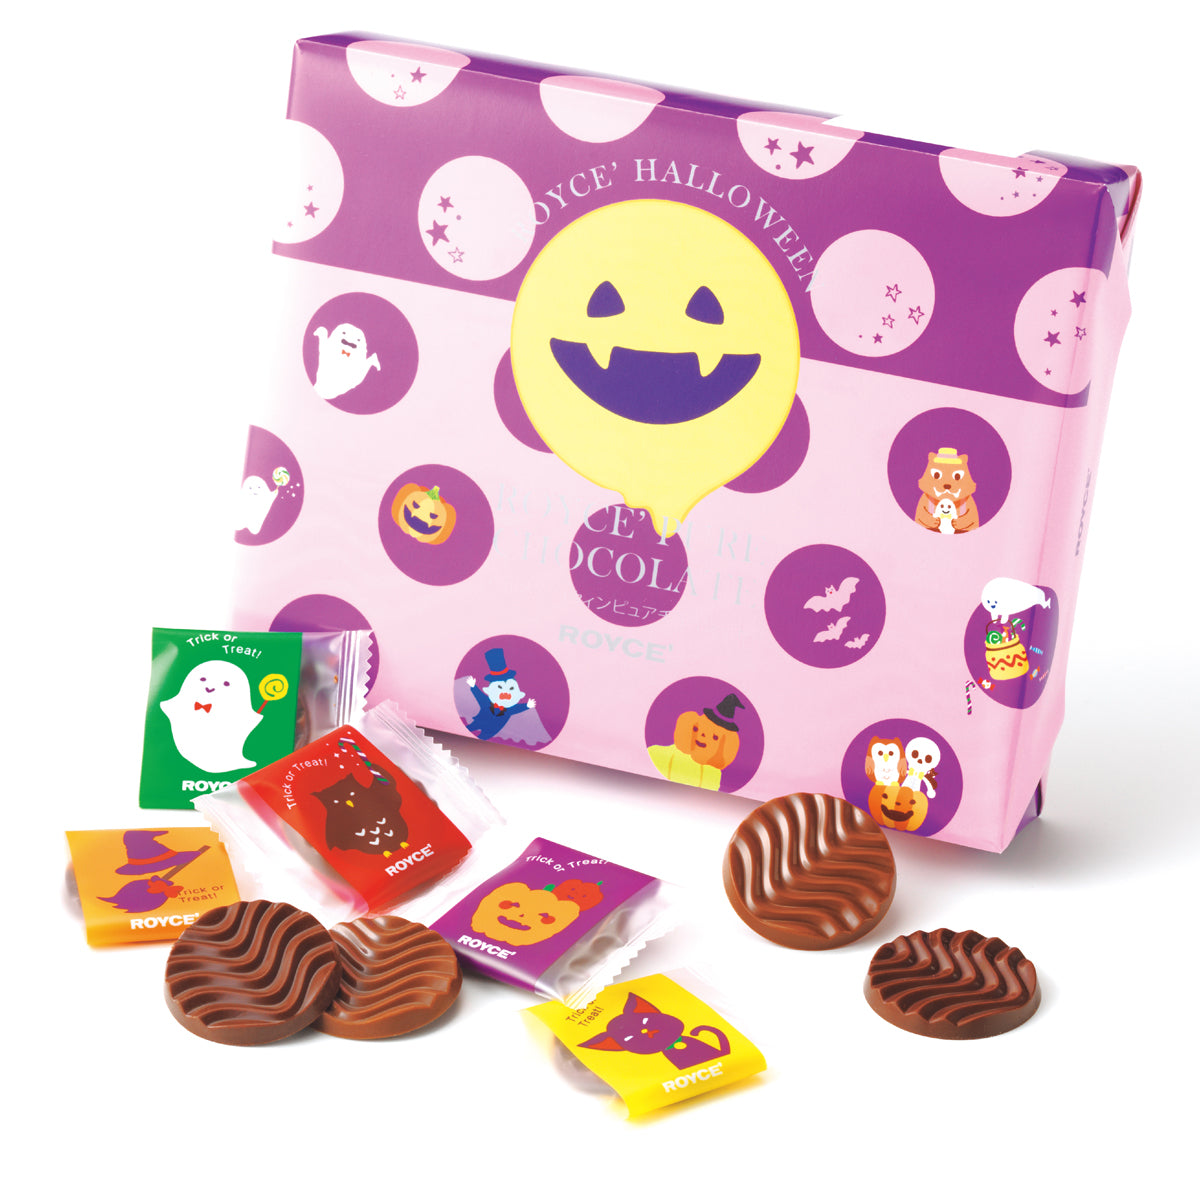 Image shows a purple and violet box with illustrations. Text on box says ROYCE' Halloween ROYCE' Pure Chocolate ROYCE'. Accents include chocolate discs and printed chocolate wrappers. Background is white.